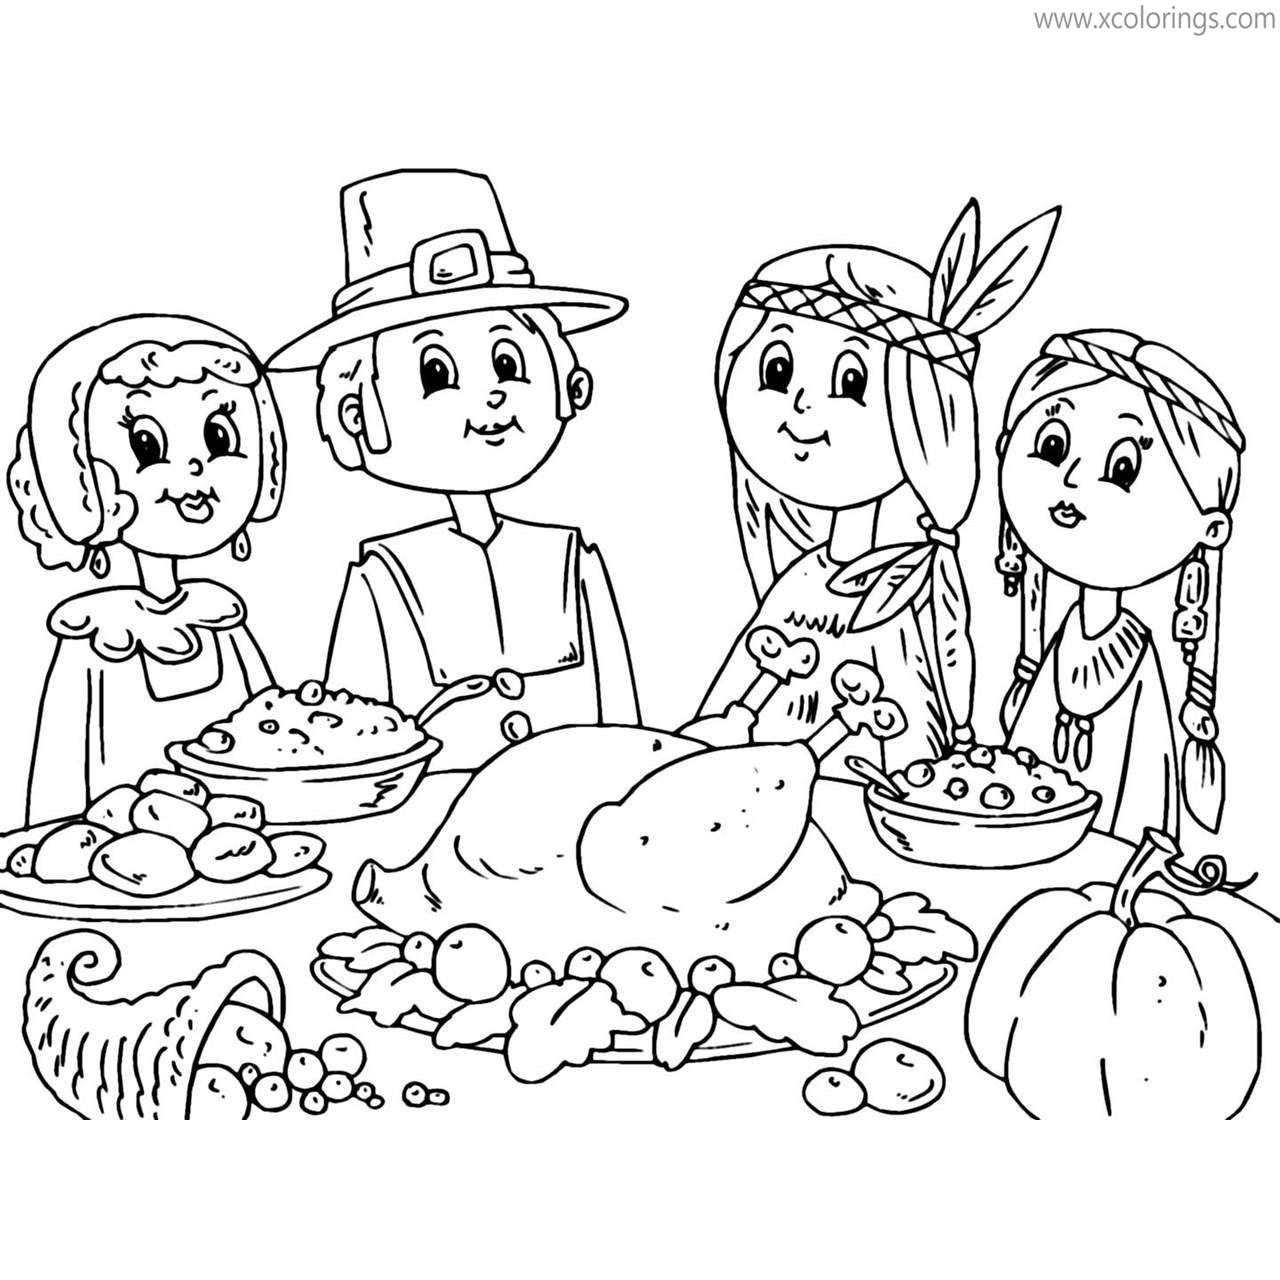 Free Pilgrim Coloring Pages Thanksgiving-Dinner with Indians printable